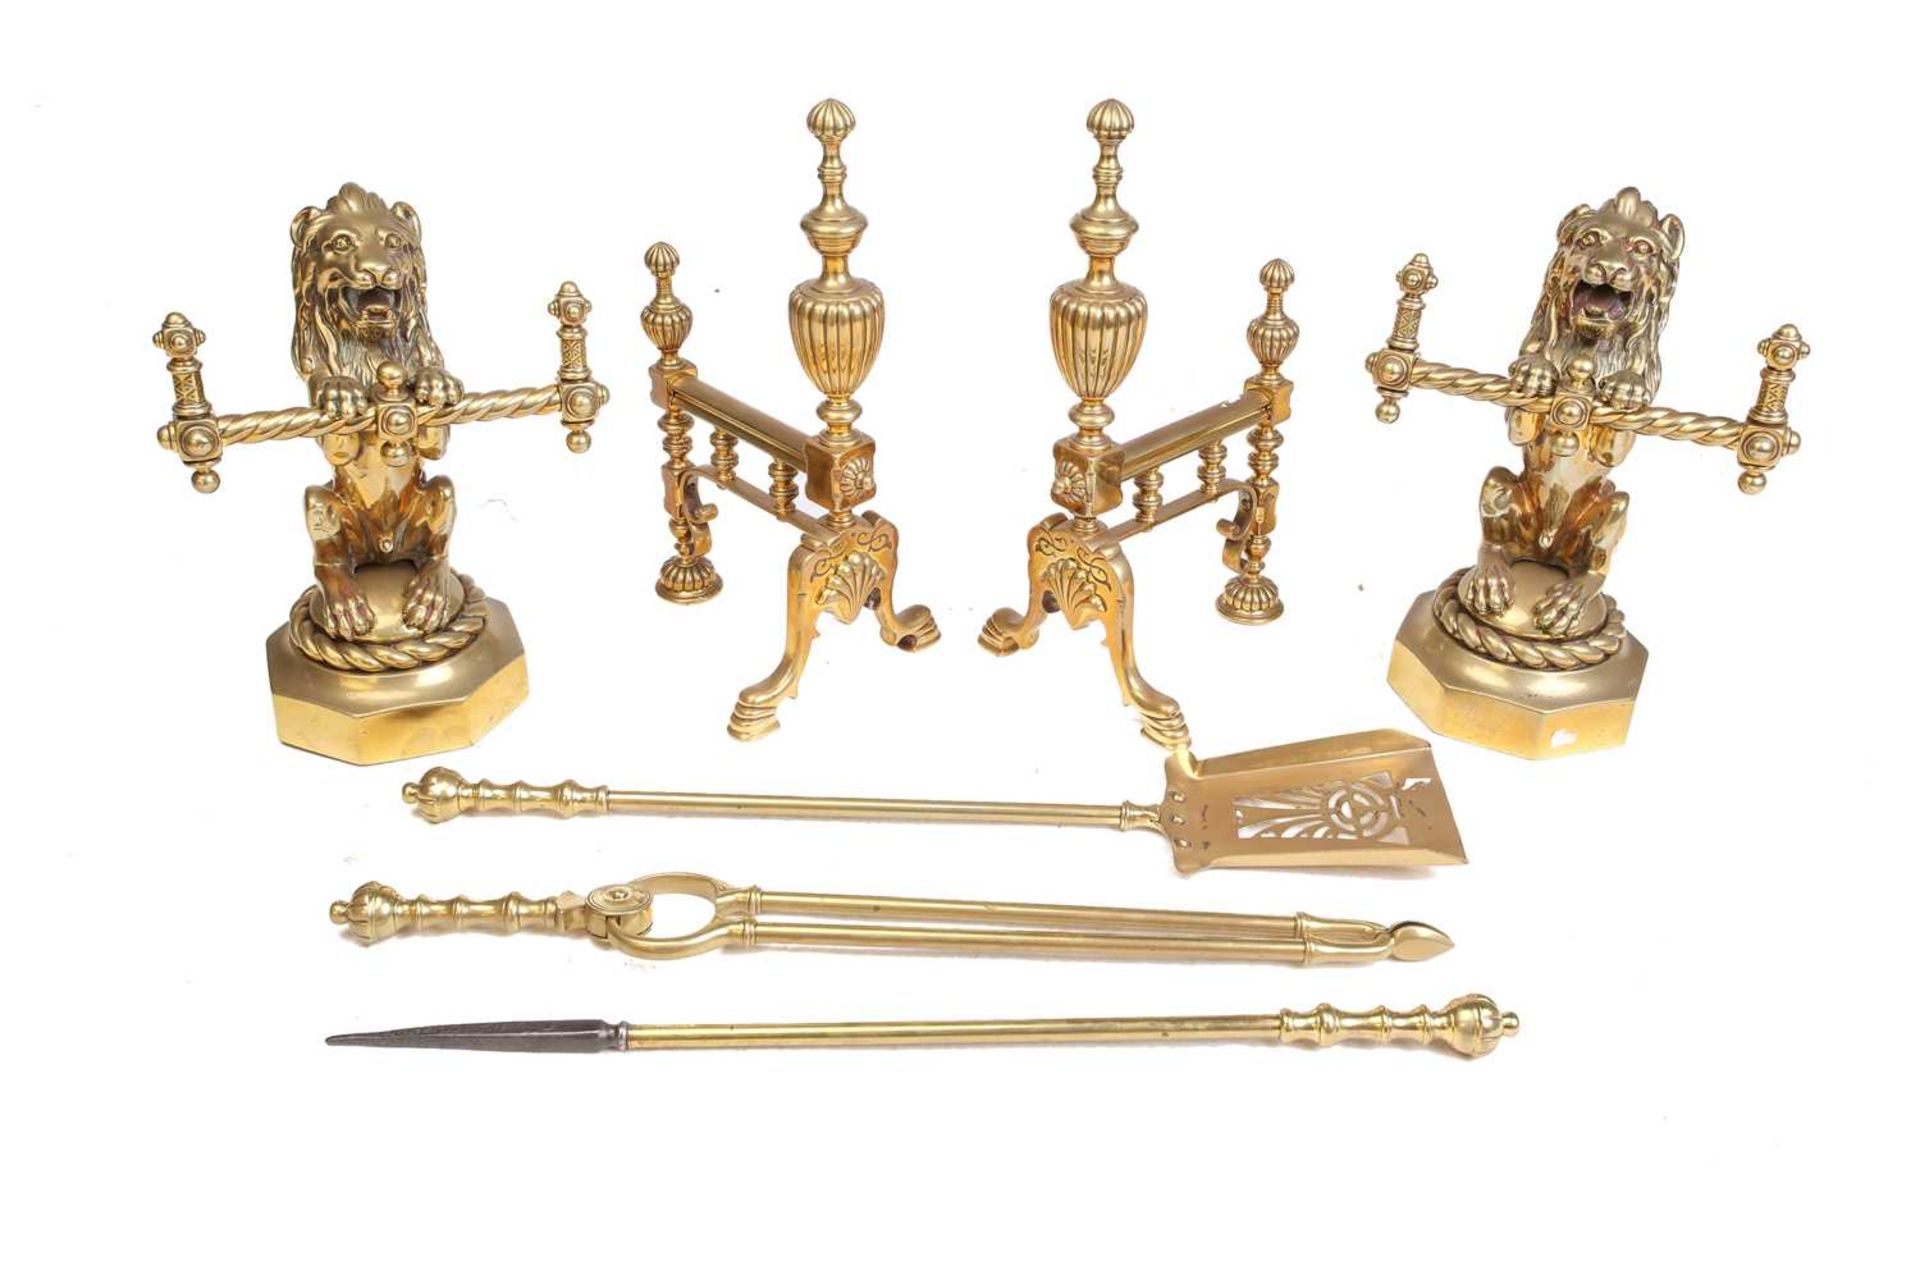 A pair of Victorian cast and gilt brass heraldic sejant erect lion firedogs, each holding a